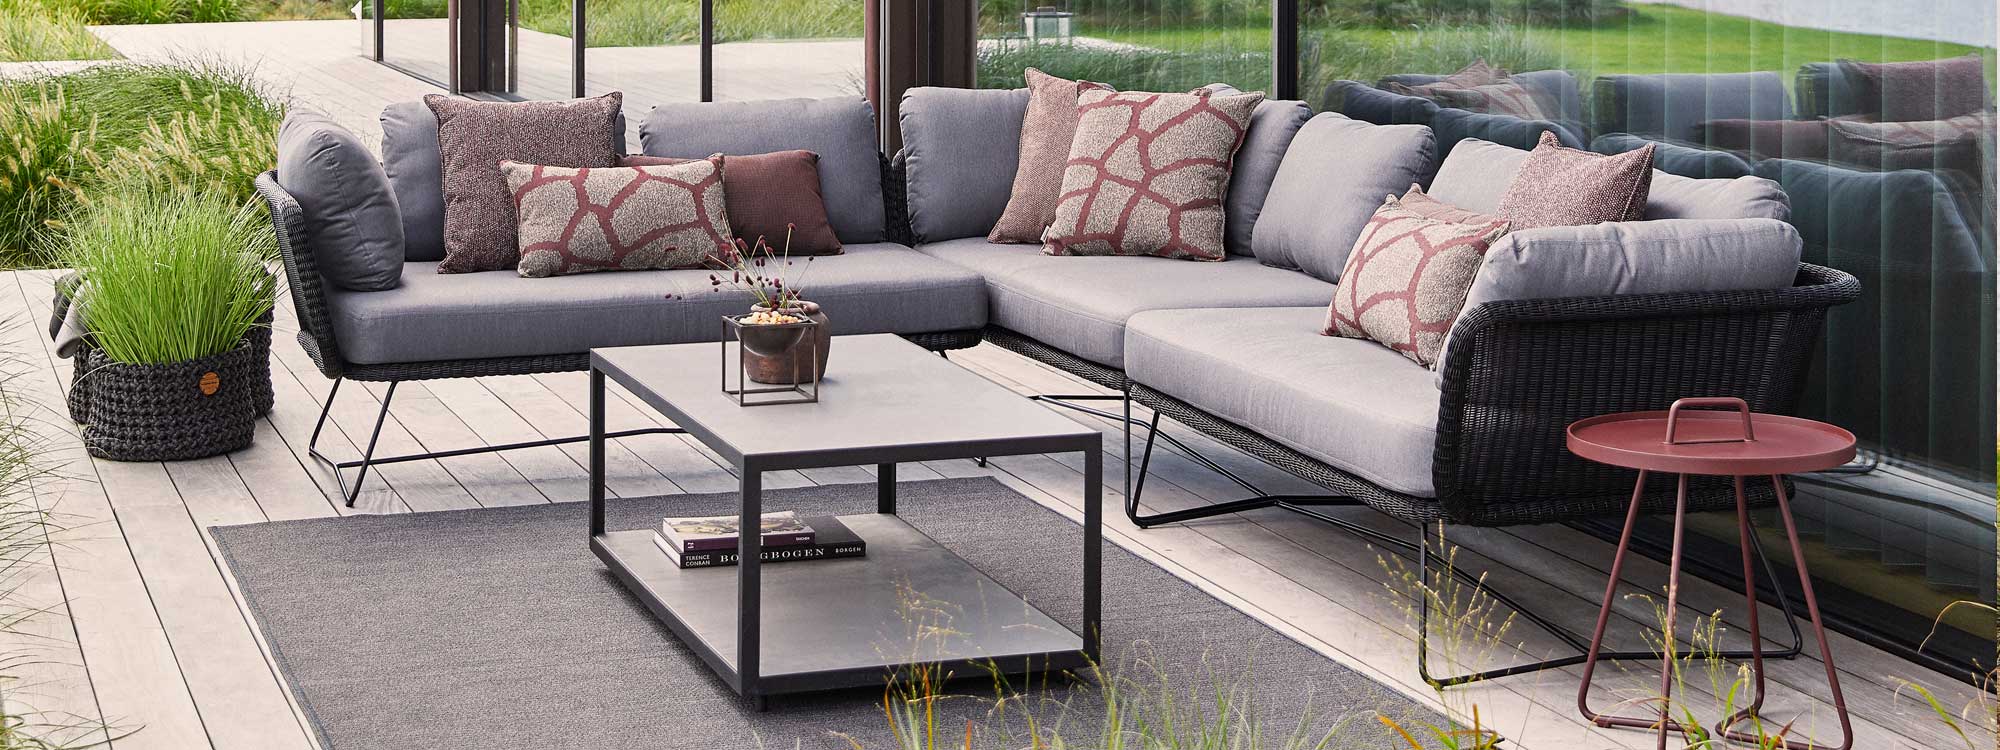 Image of black Horizon rattan corner sofa with grey cushions, together with Level rectangular low table by Cane-line